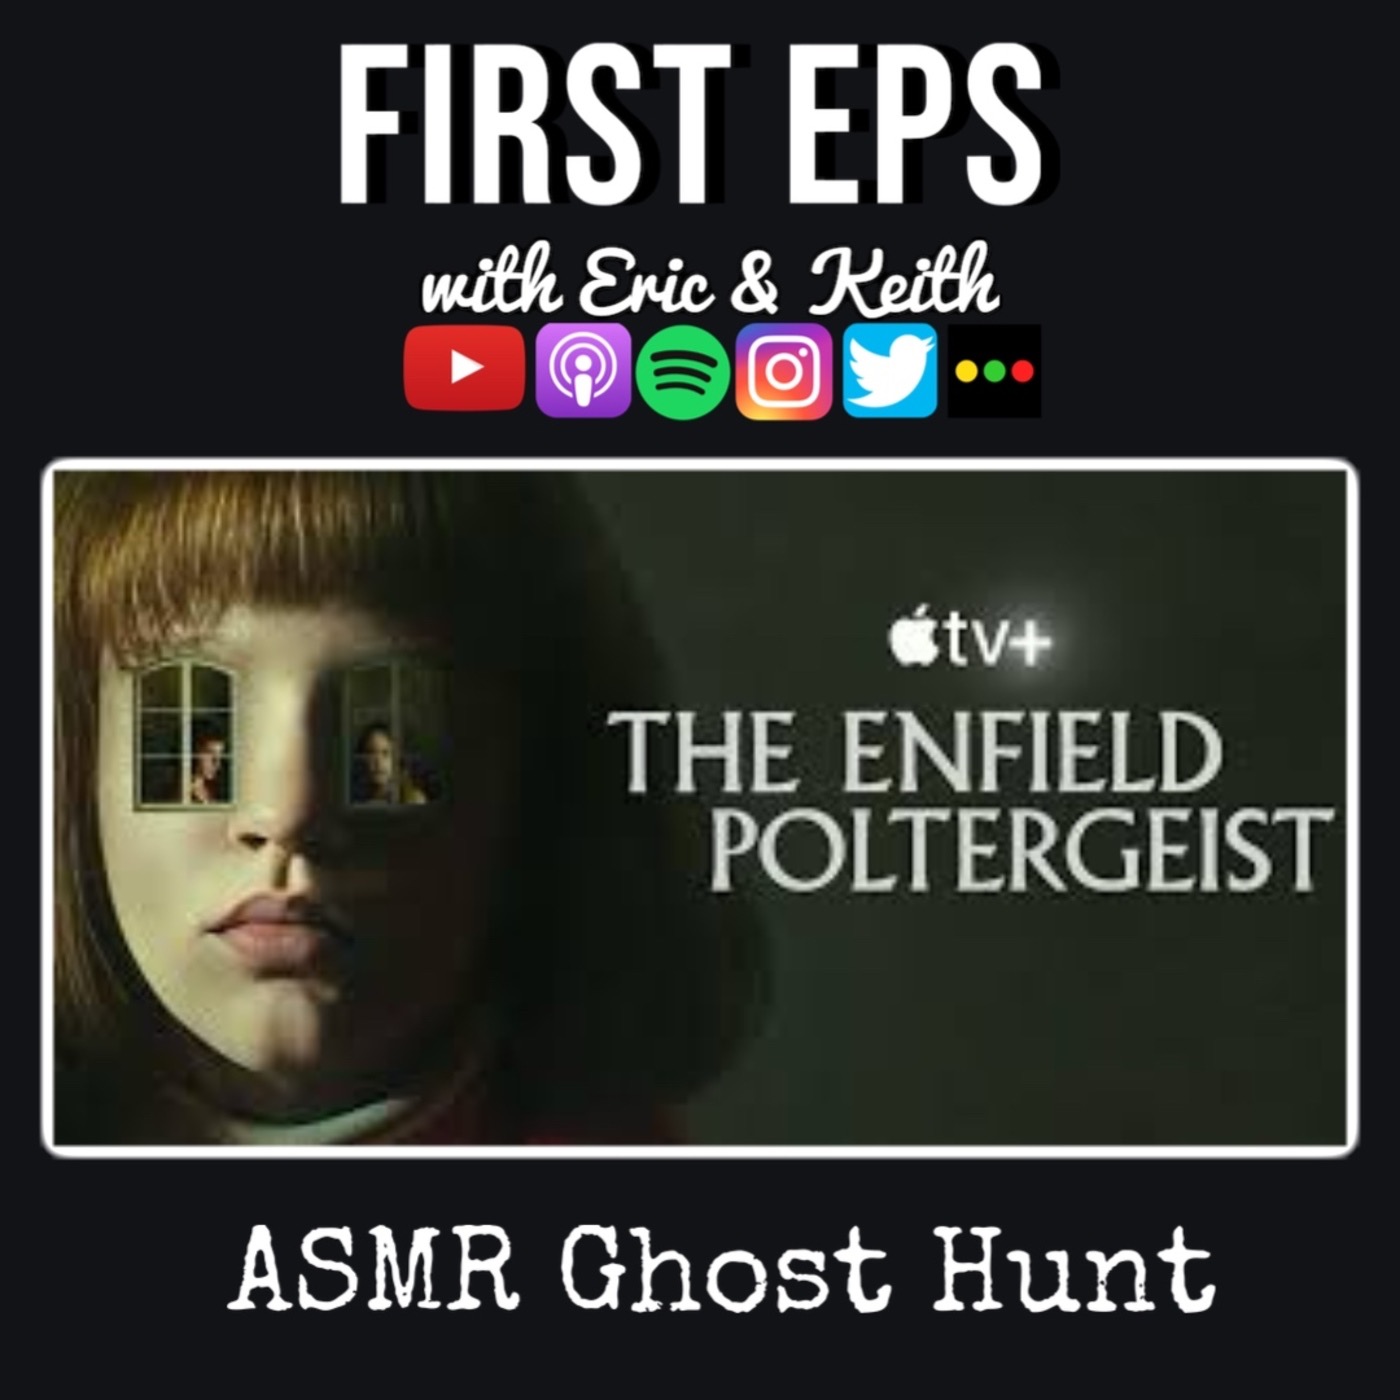 The Enfield Poltergeist: ASMR Ghost Hunt